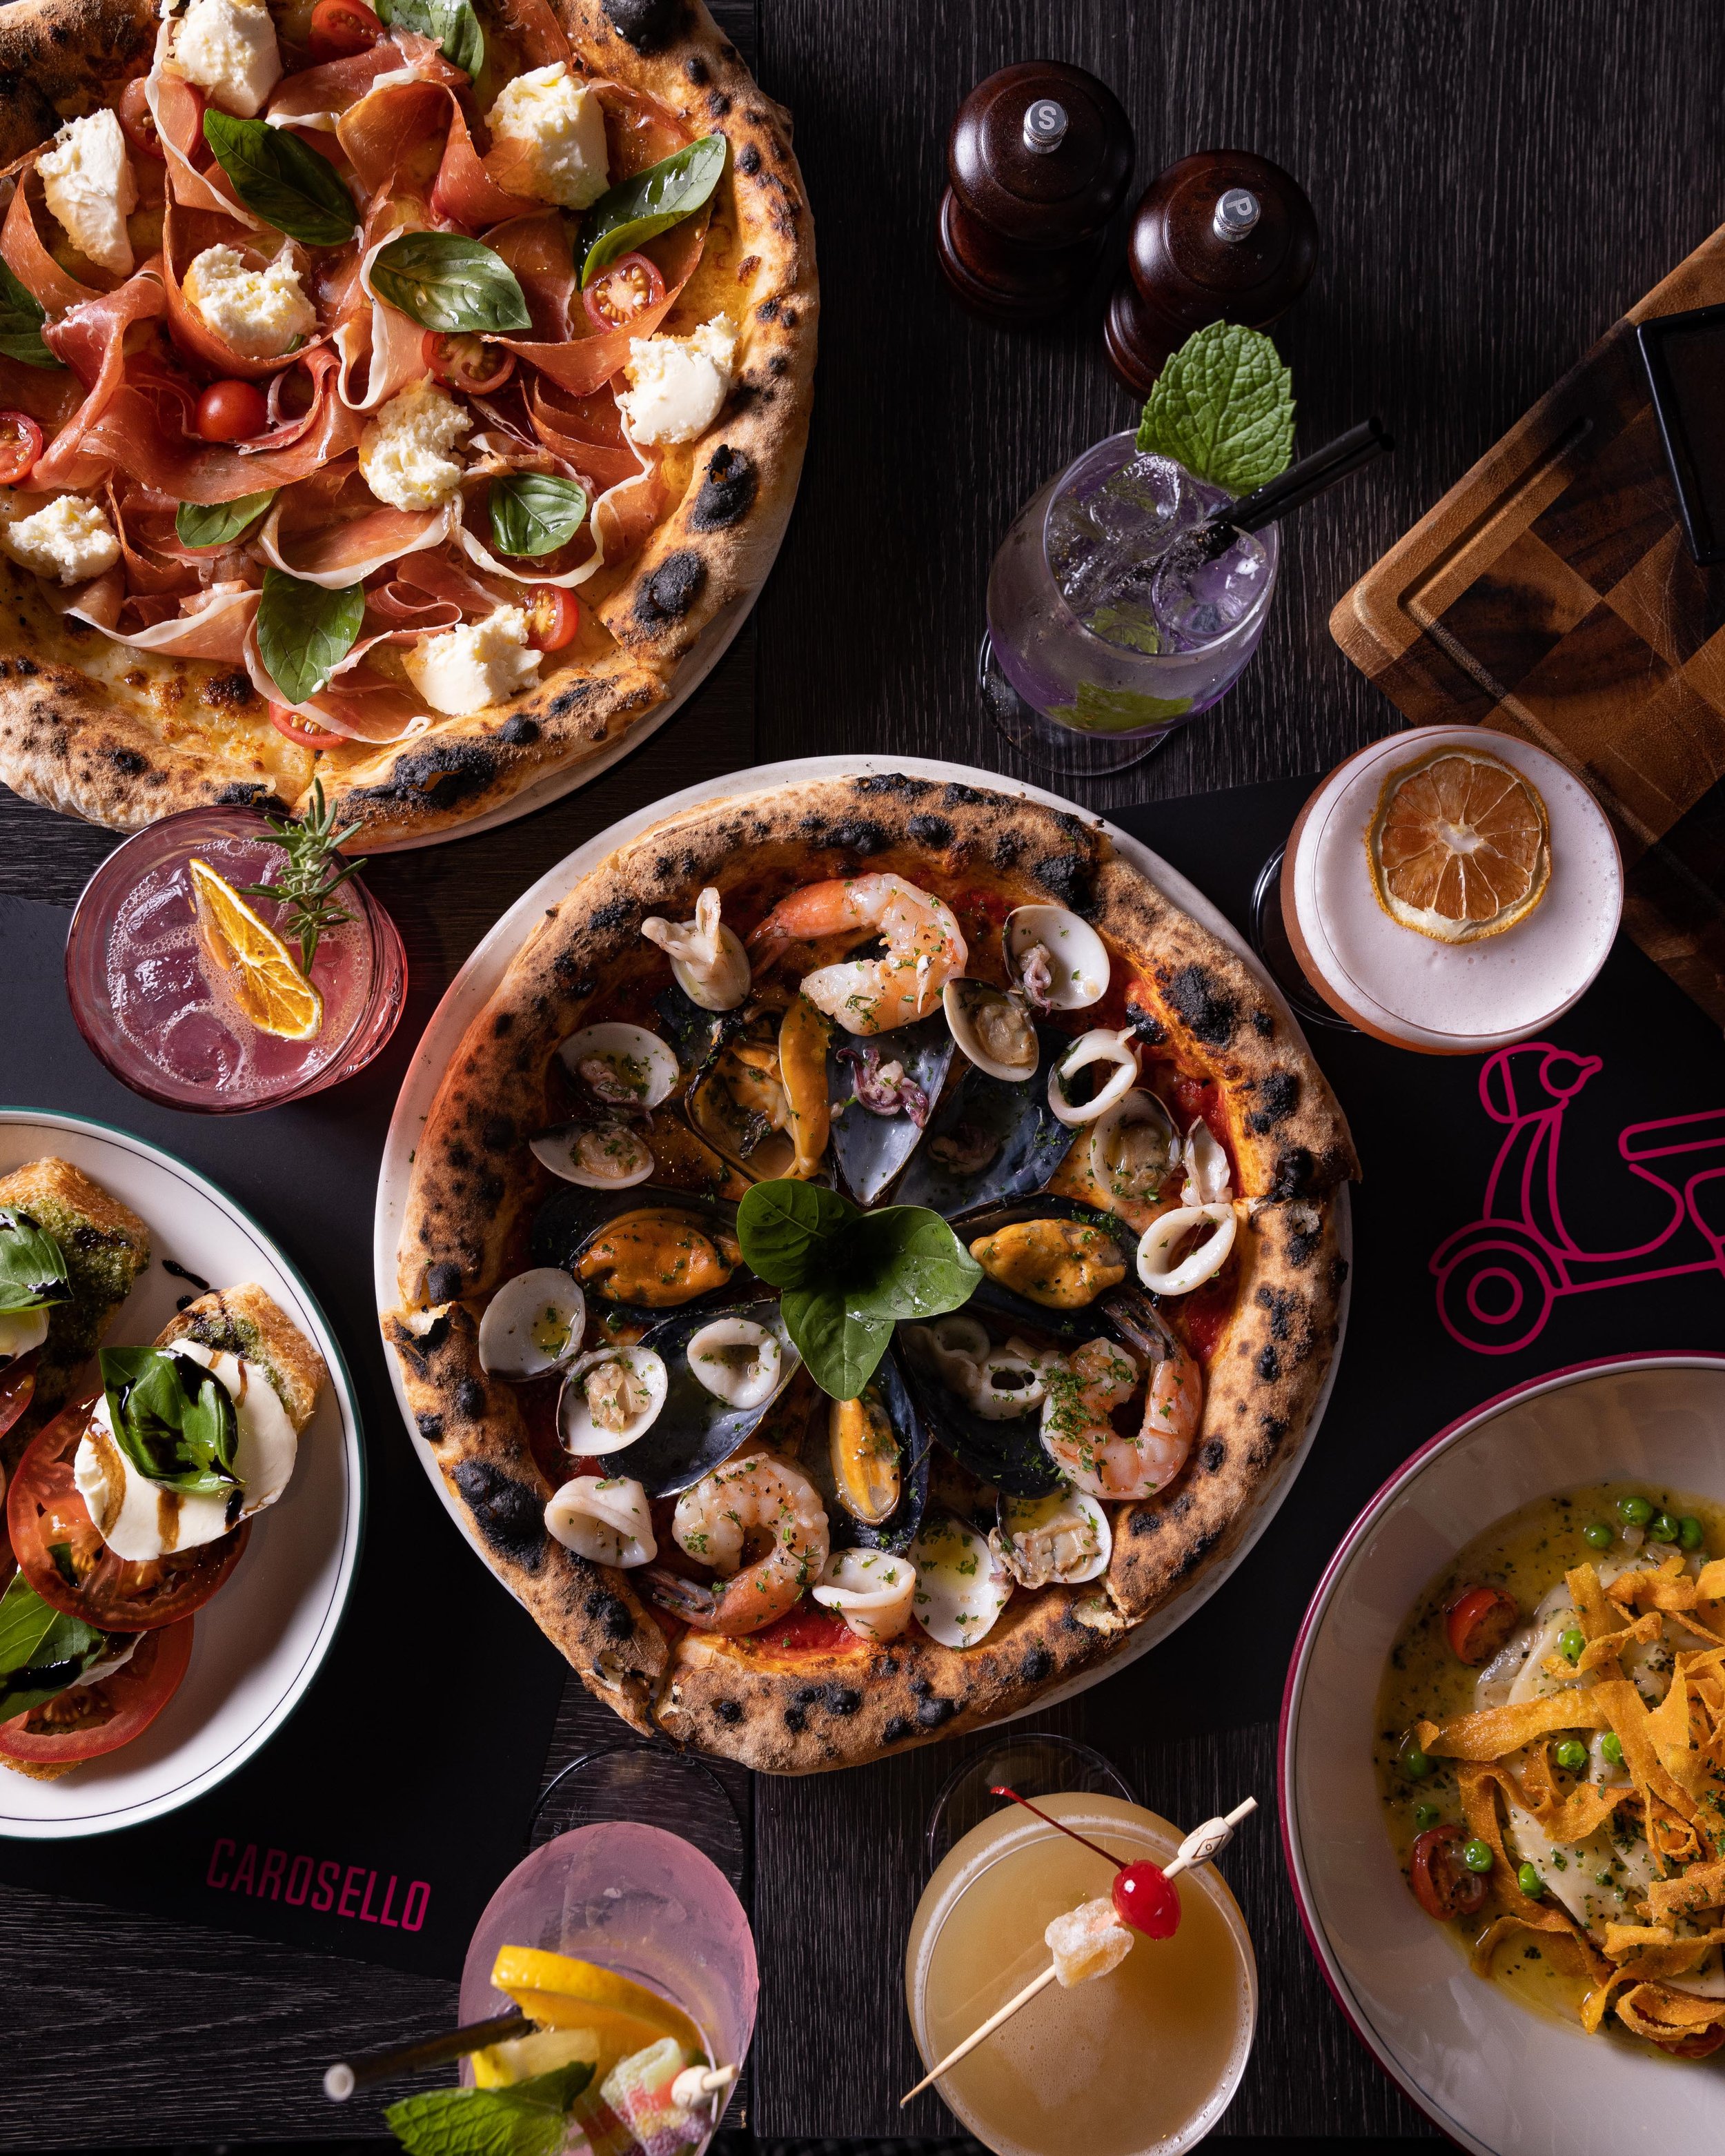  Italian feast with the best pizzas in moonee ponds